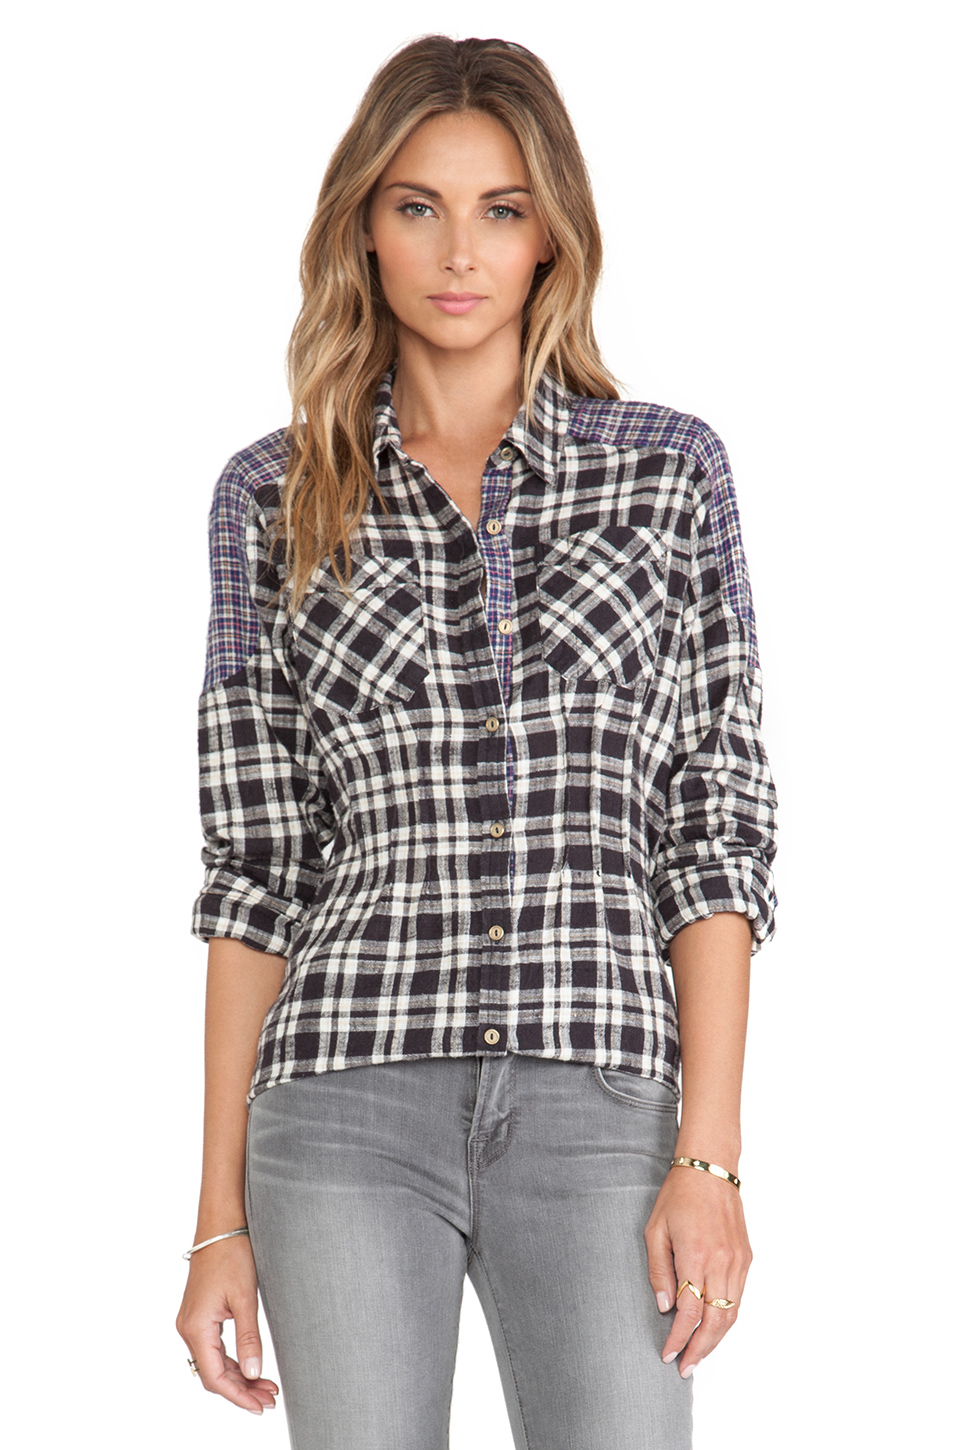 Free People Catch Up With Me Plaid Shirt - Lyst